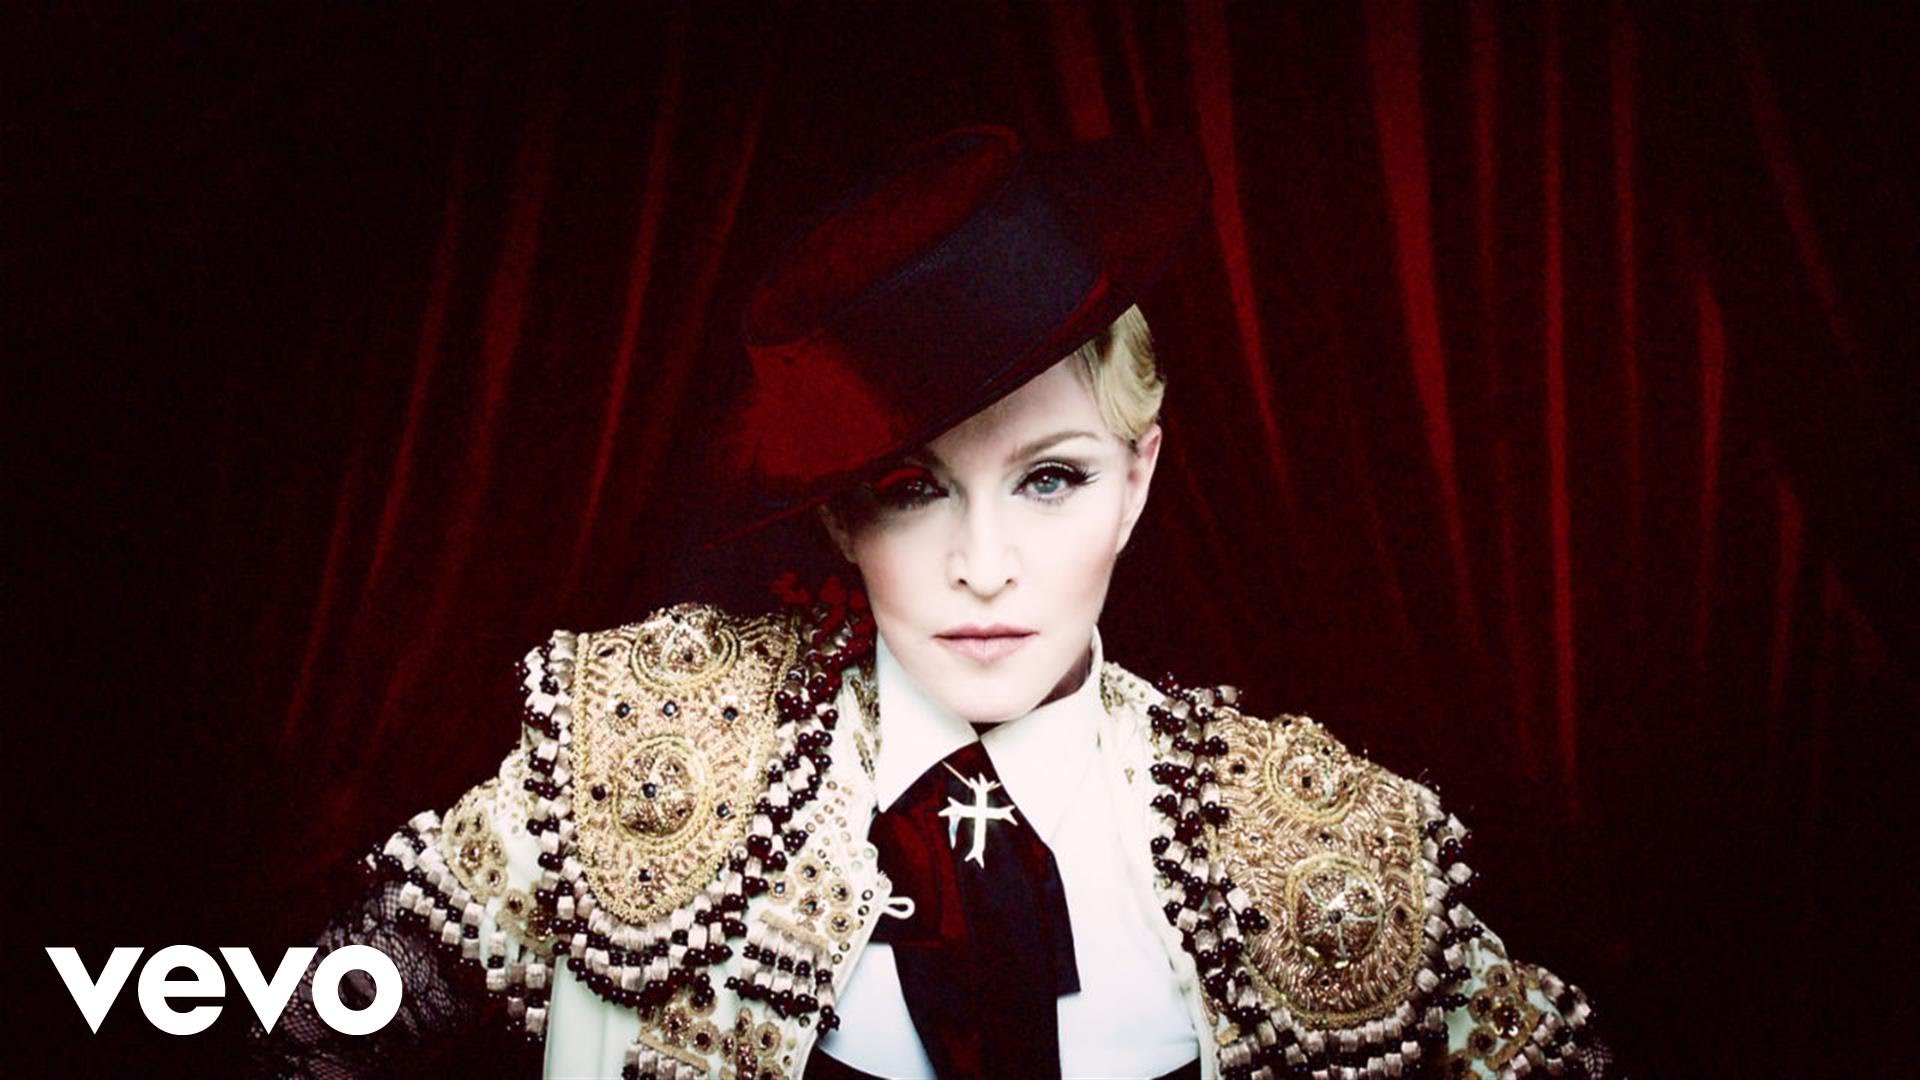 Madonna - Living For Love - YouTube